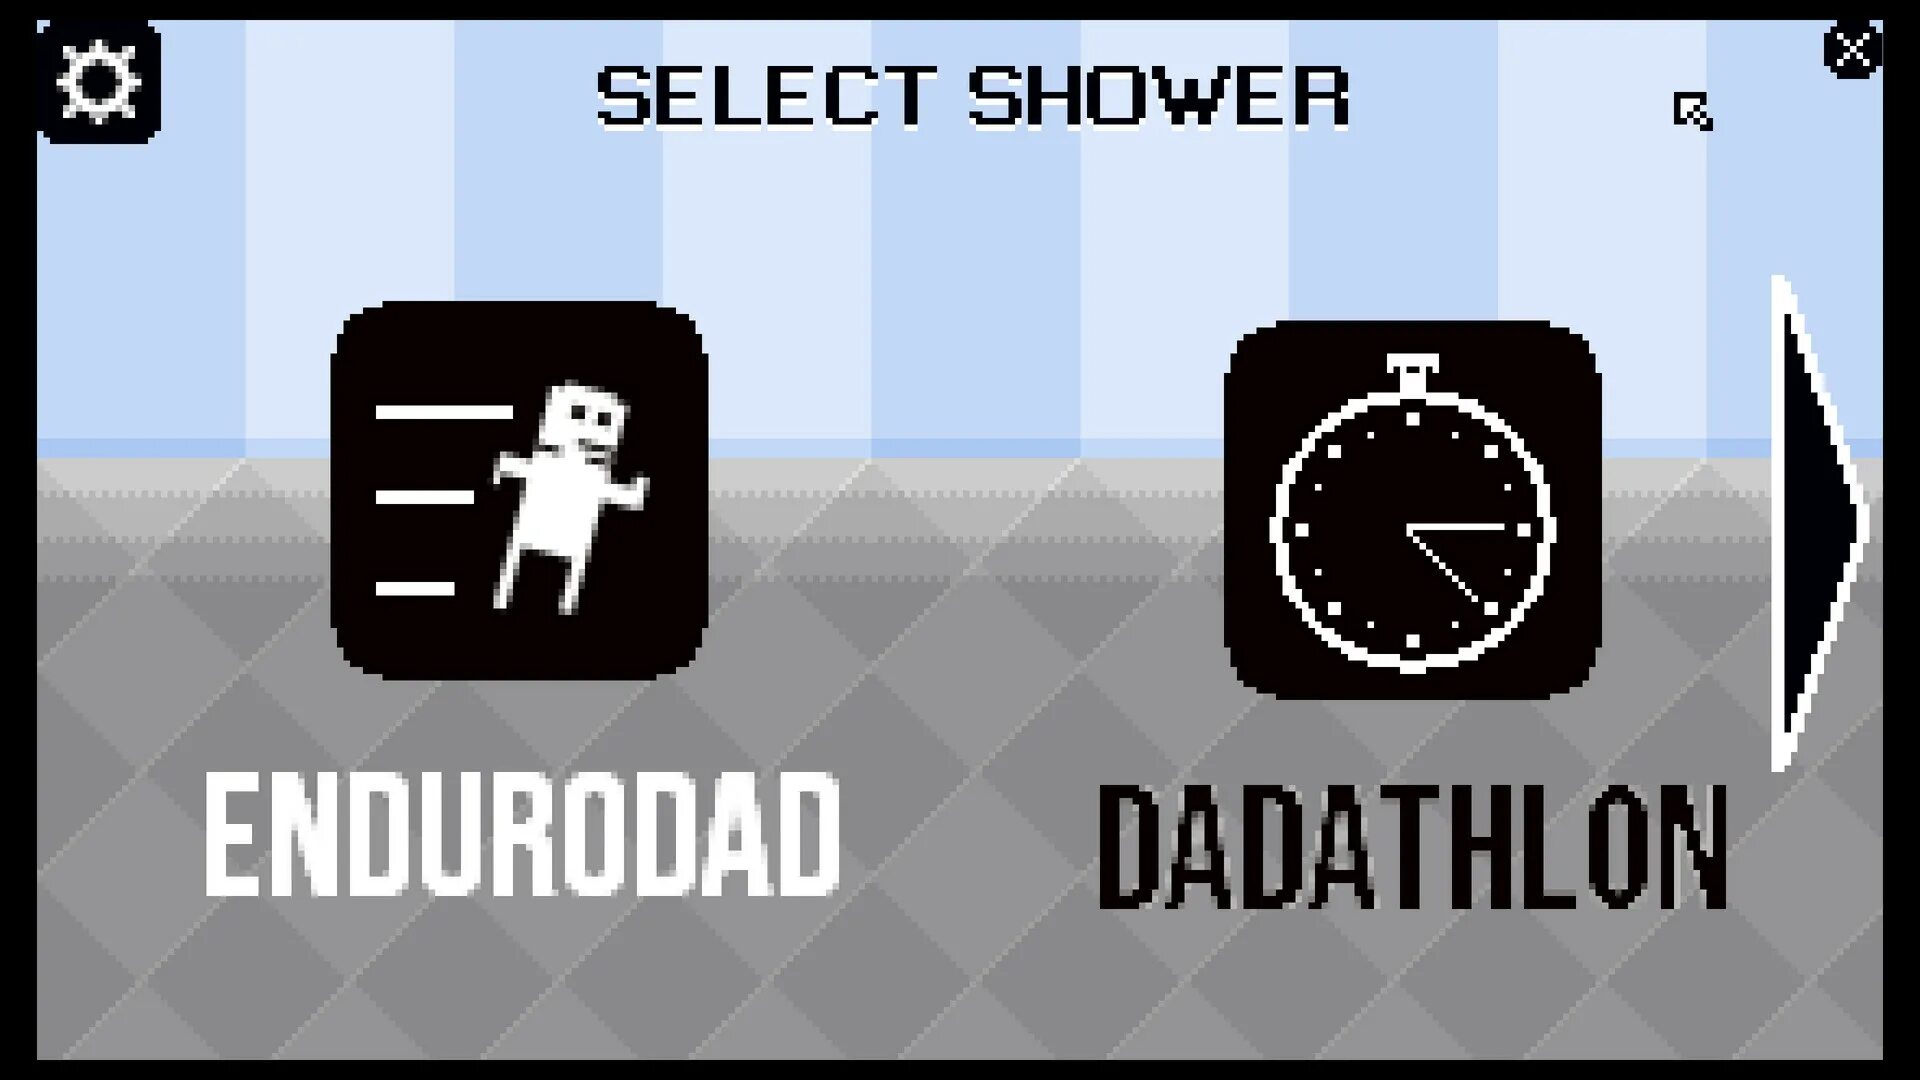 Shower dad. Shower with your dad Simulator. Игра Cubicles. Shower with your dad Simulator 2015. Shower with your dad Simulator 2015: do you still Shower with your dad.